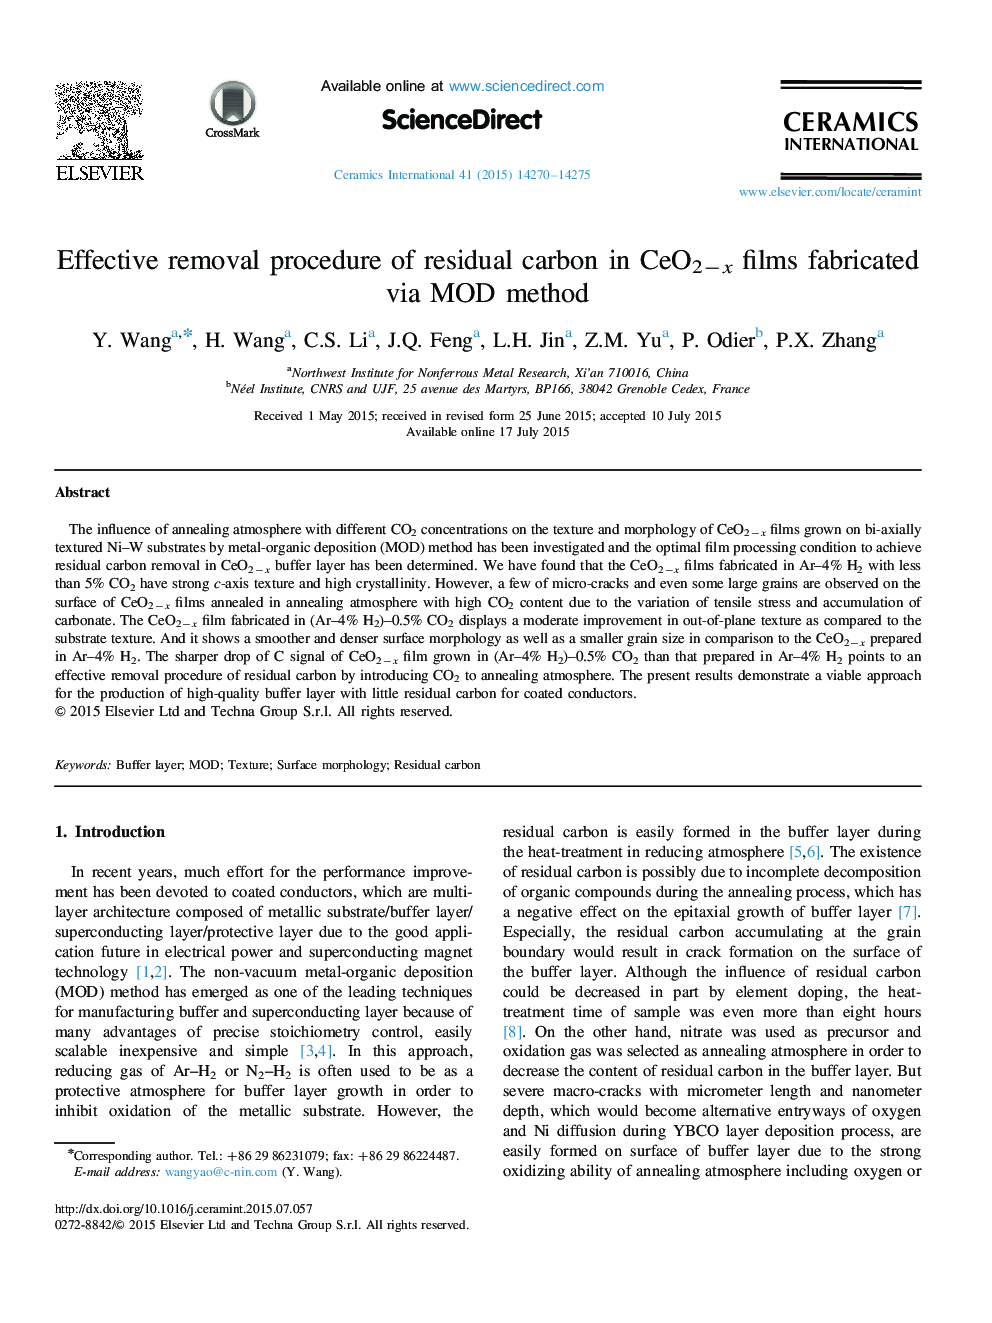 Effective removal procedure of residual carbon in CeO2−x films fabricated via MOD method